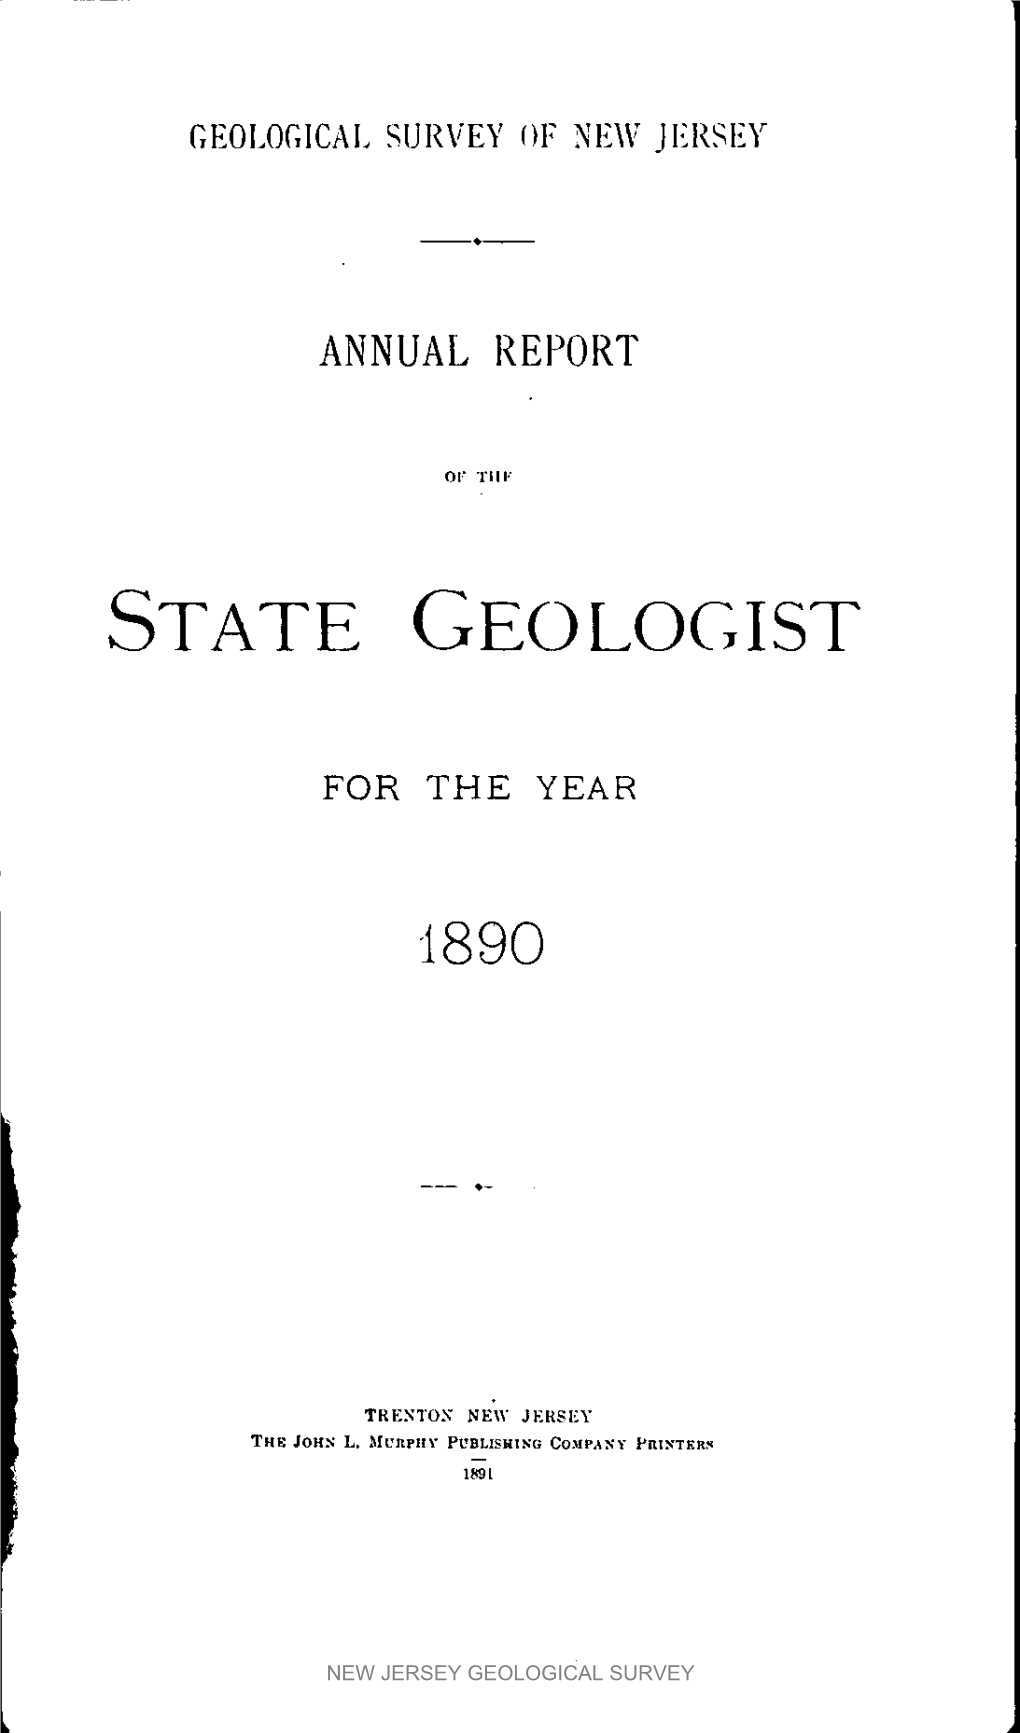 Annual Report of the State Geologist for the Year 1890